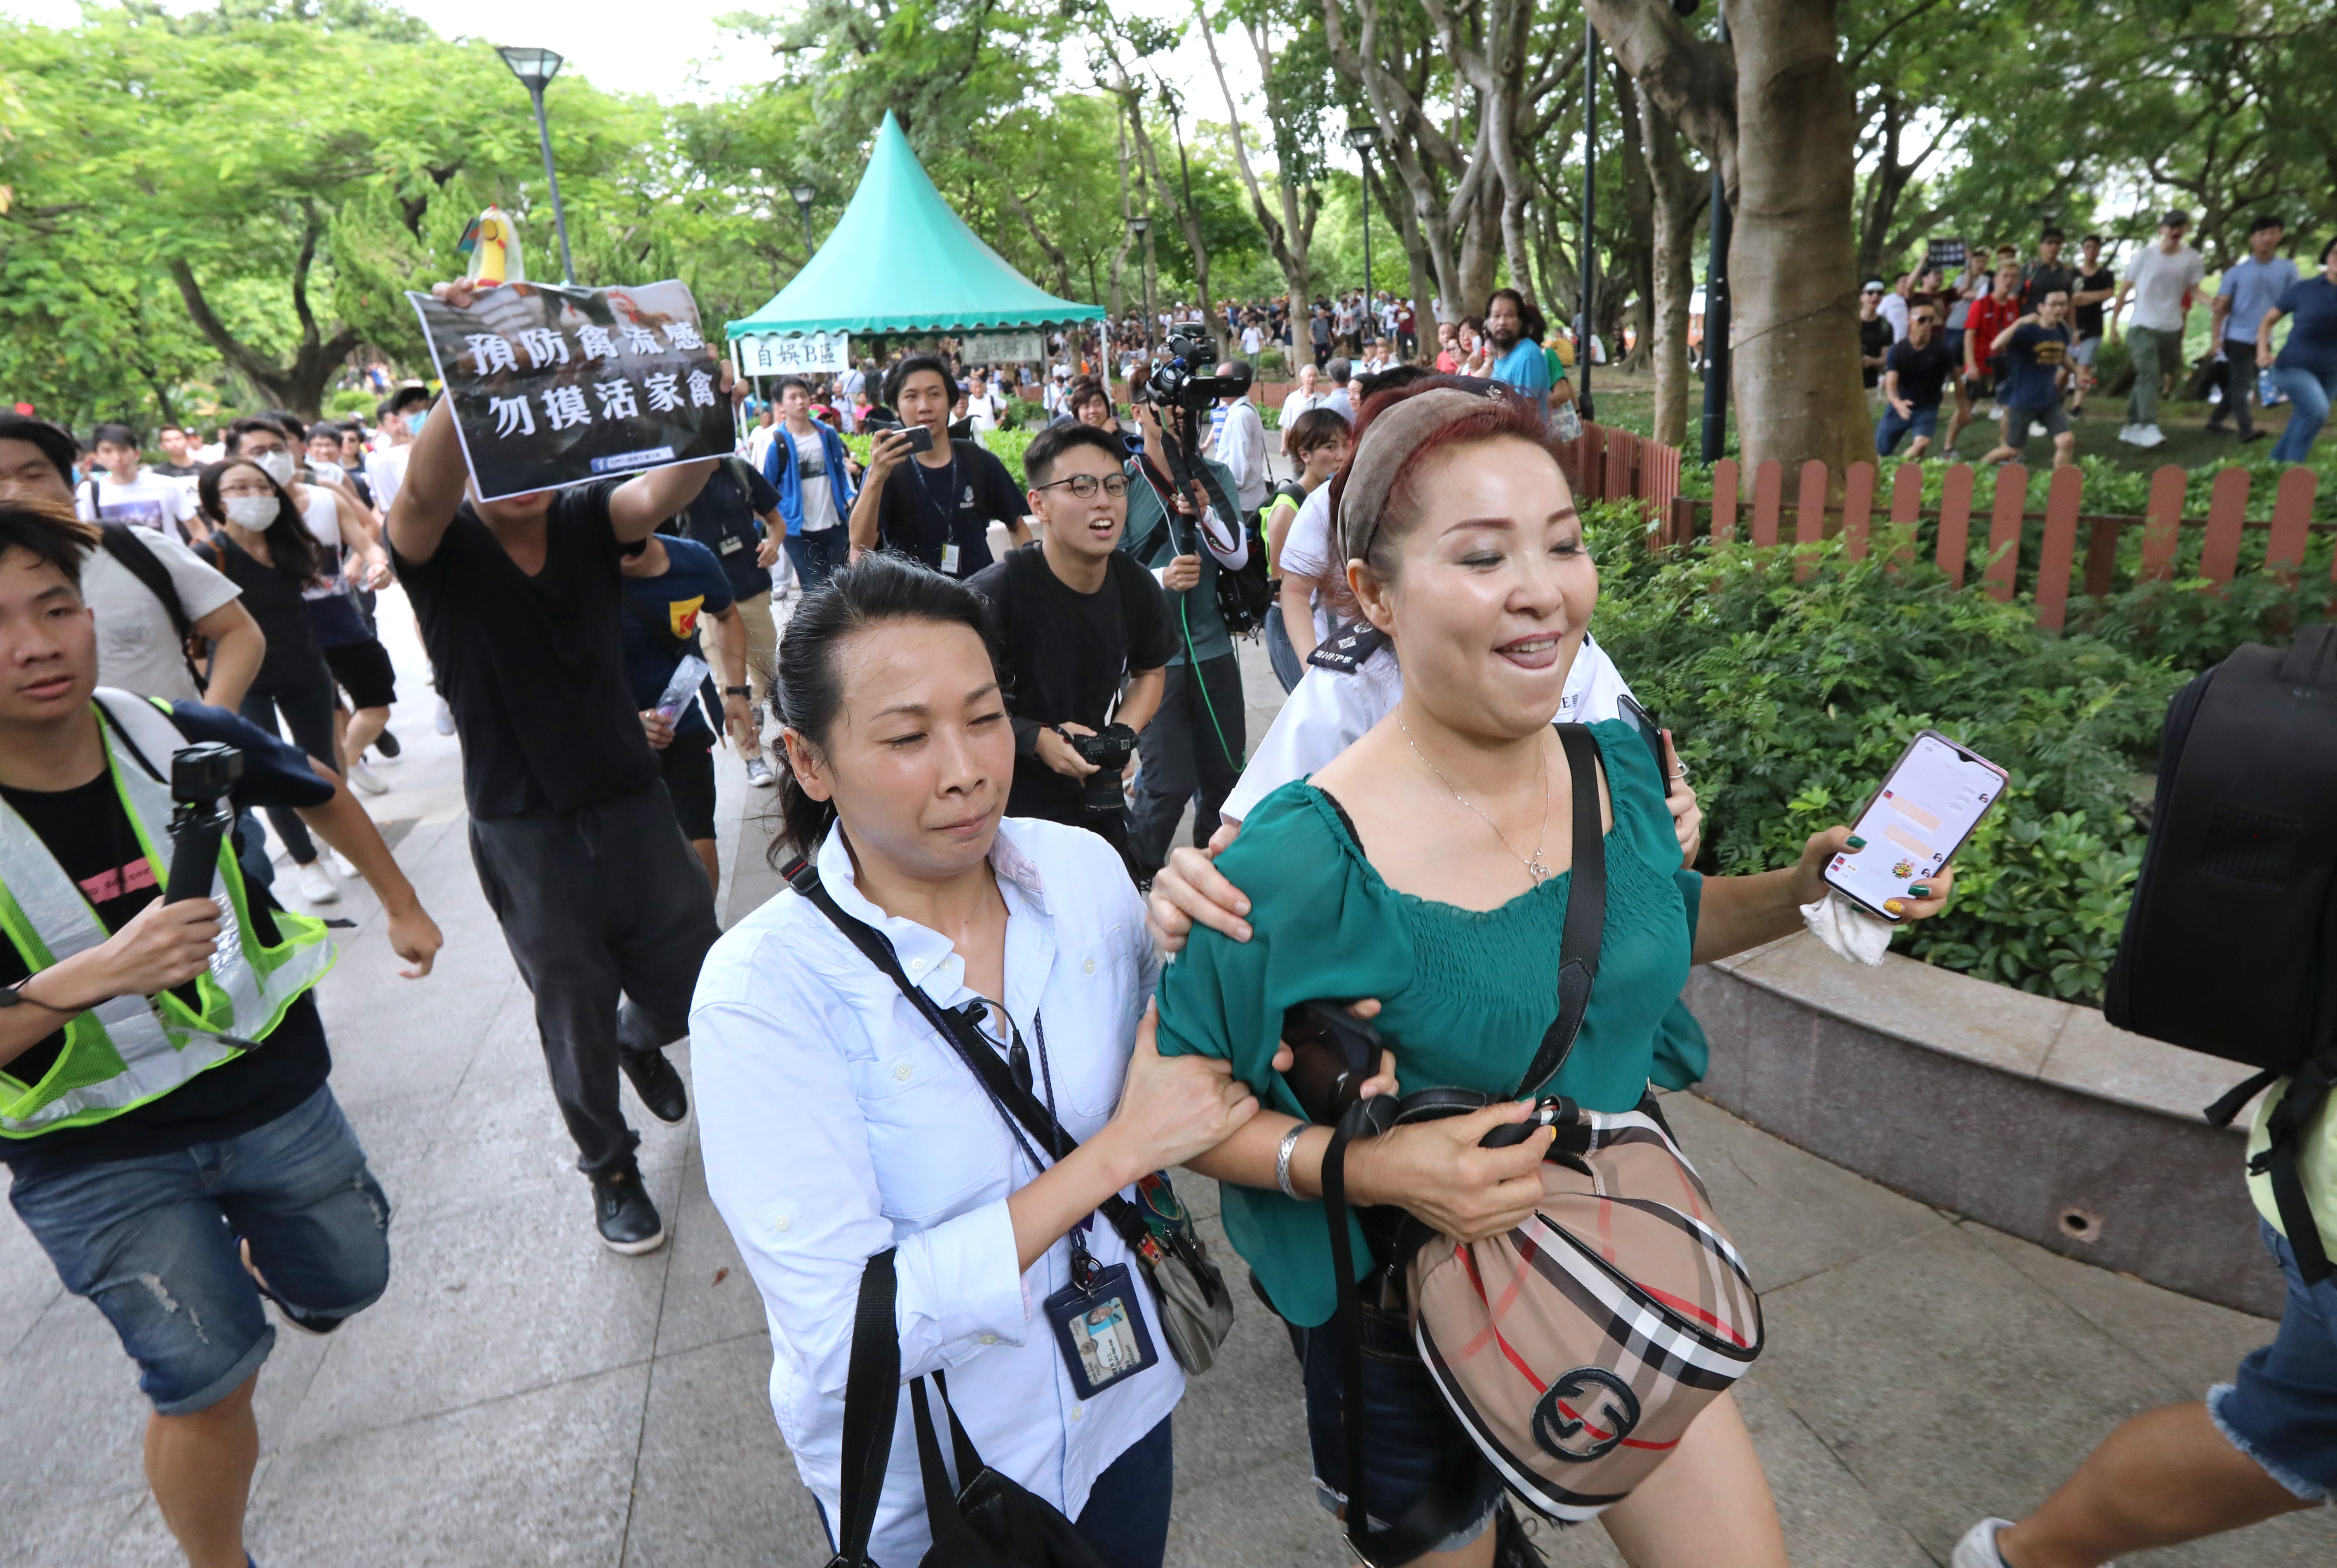 An officer escorts a woman away from angry protesters in Tuen Mun Park who are decrying niosy and indecent performances by ‘dama’ entertainers, mostly mainlanders. Photo: Felix Wong